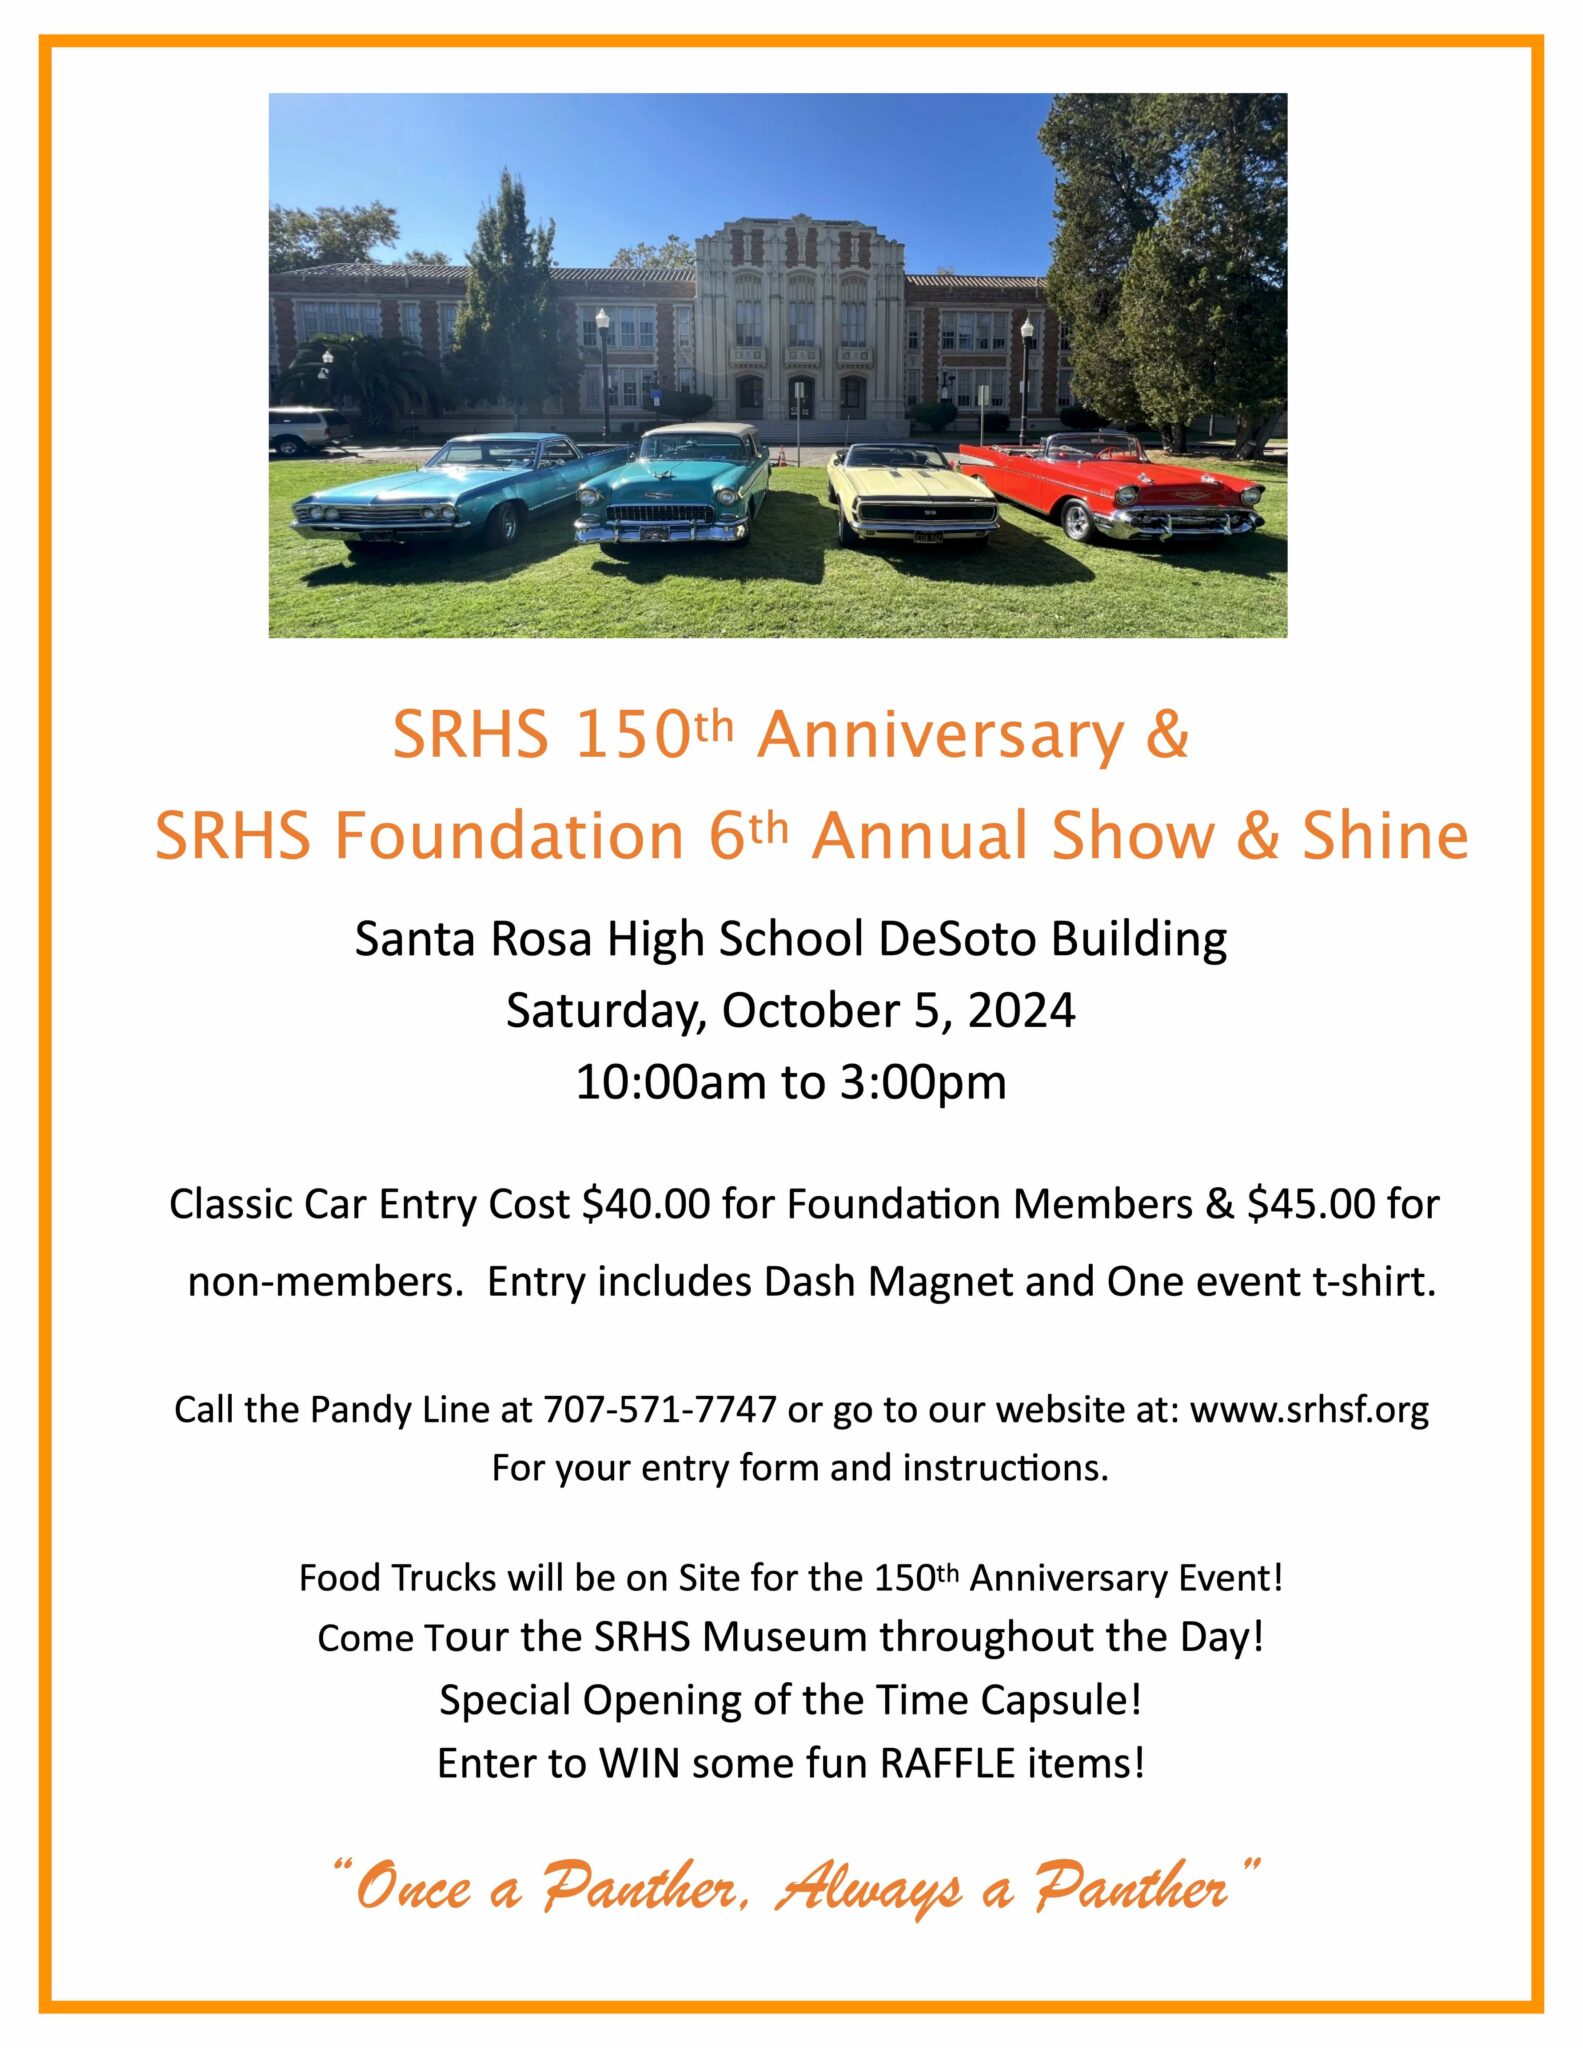 Poster for the 150th school anniversary celebration along with 6th annual show and shine event.